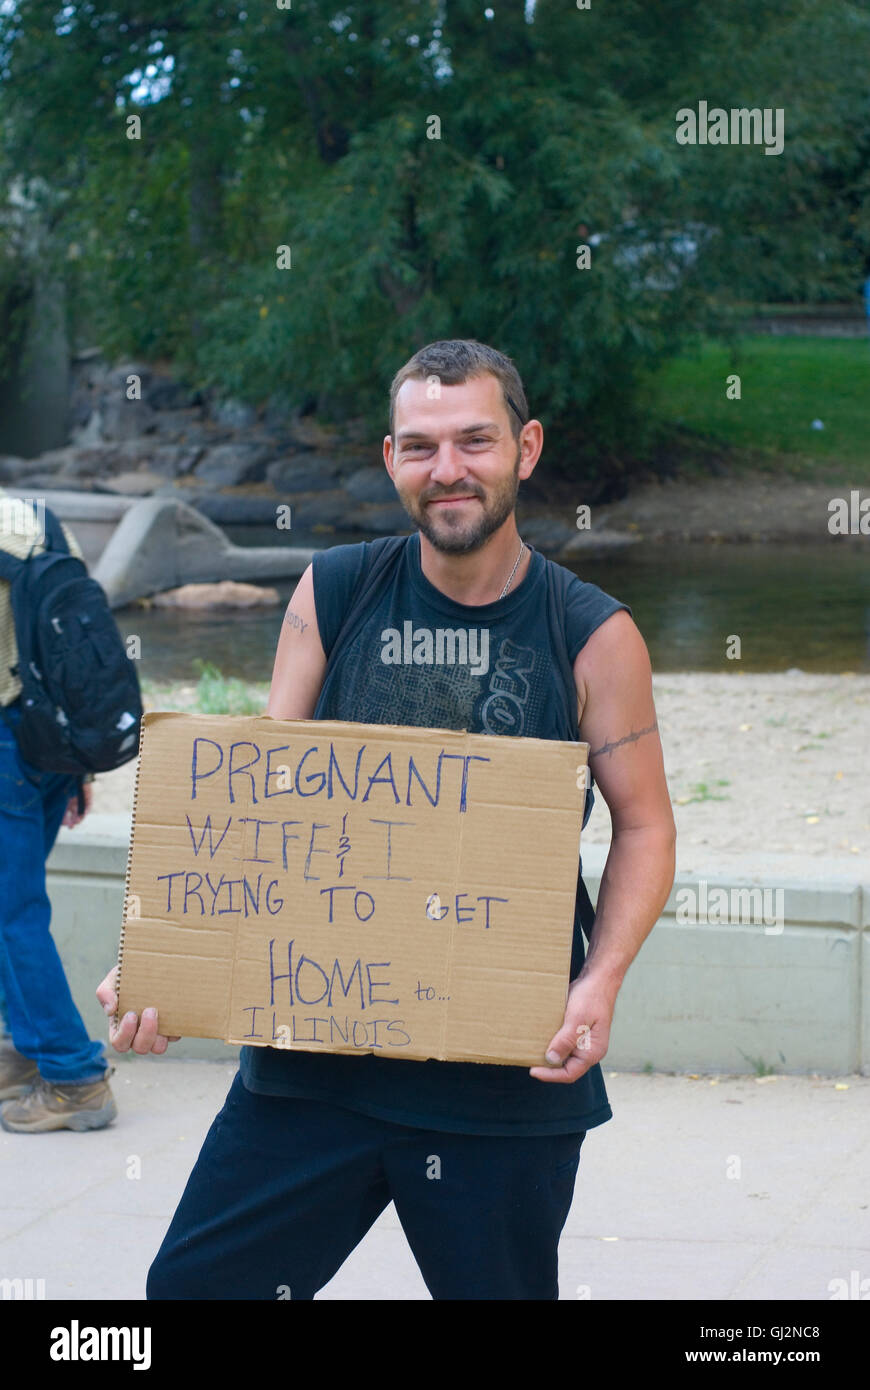 Young man asks for financial help getting home. Sign says he and his pregnant wife trying to get home to Illinois. Boulder Creek Stock Photo